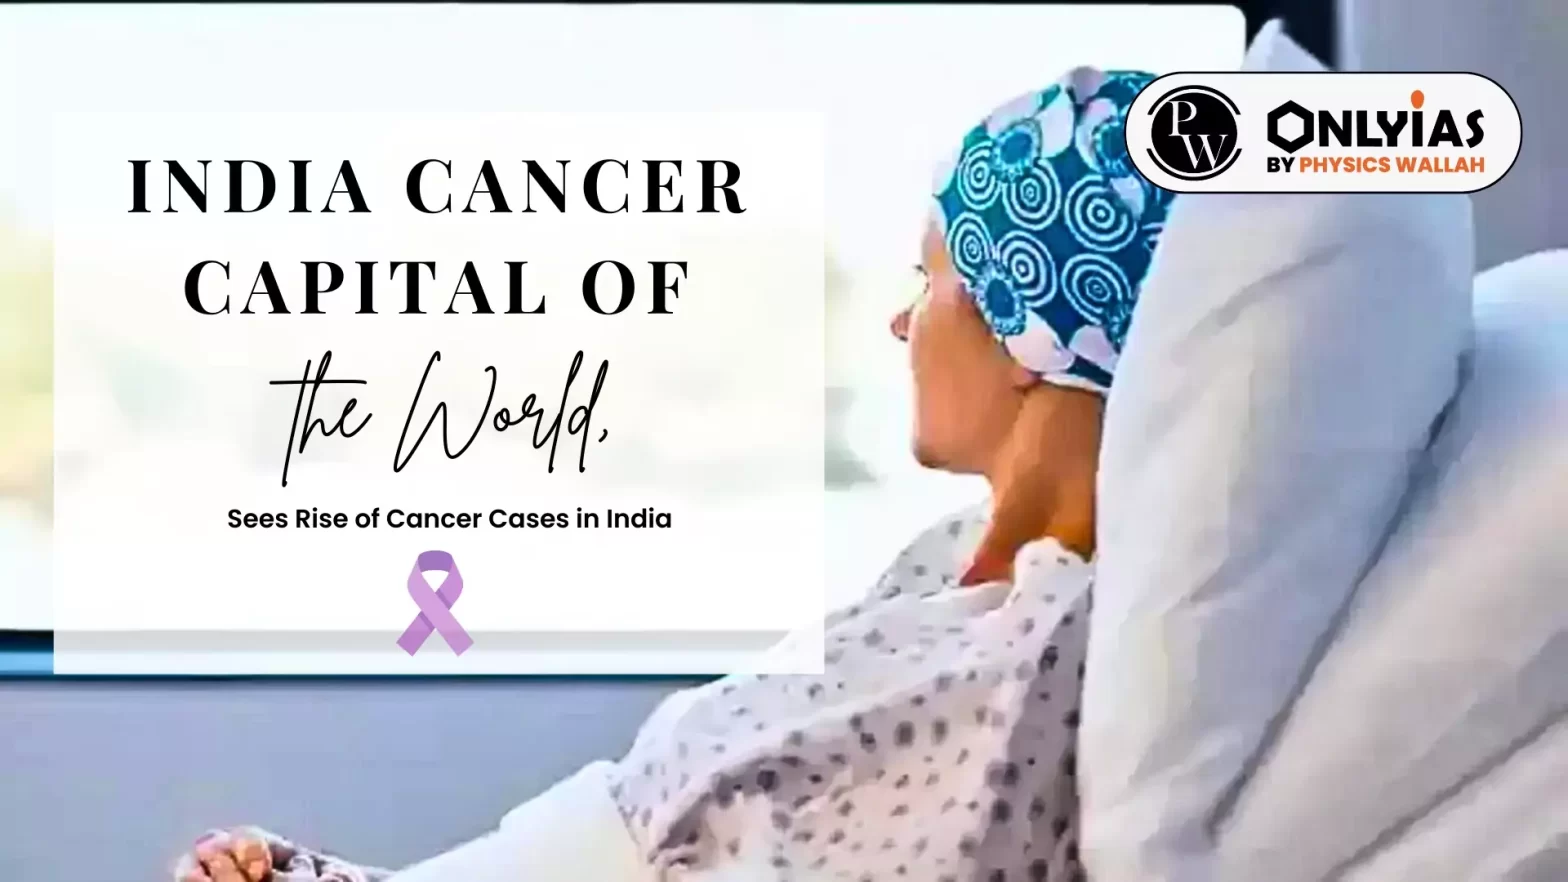 India Cancer Capital of the World, Sees Rise of Cancer Cases in India